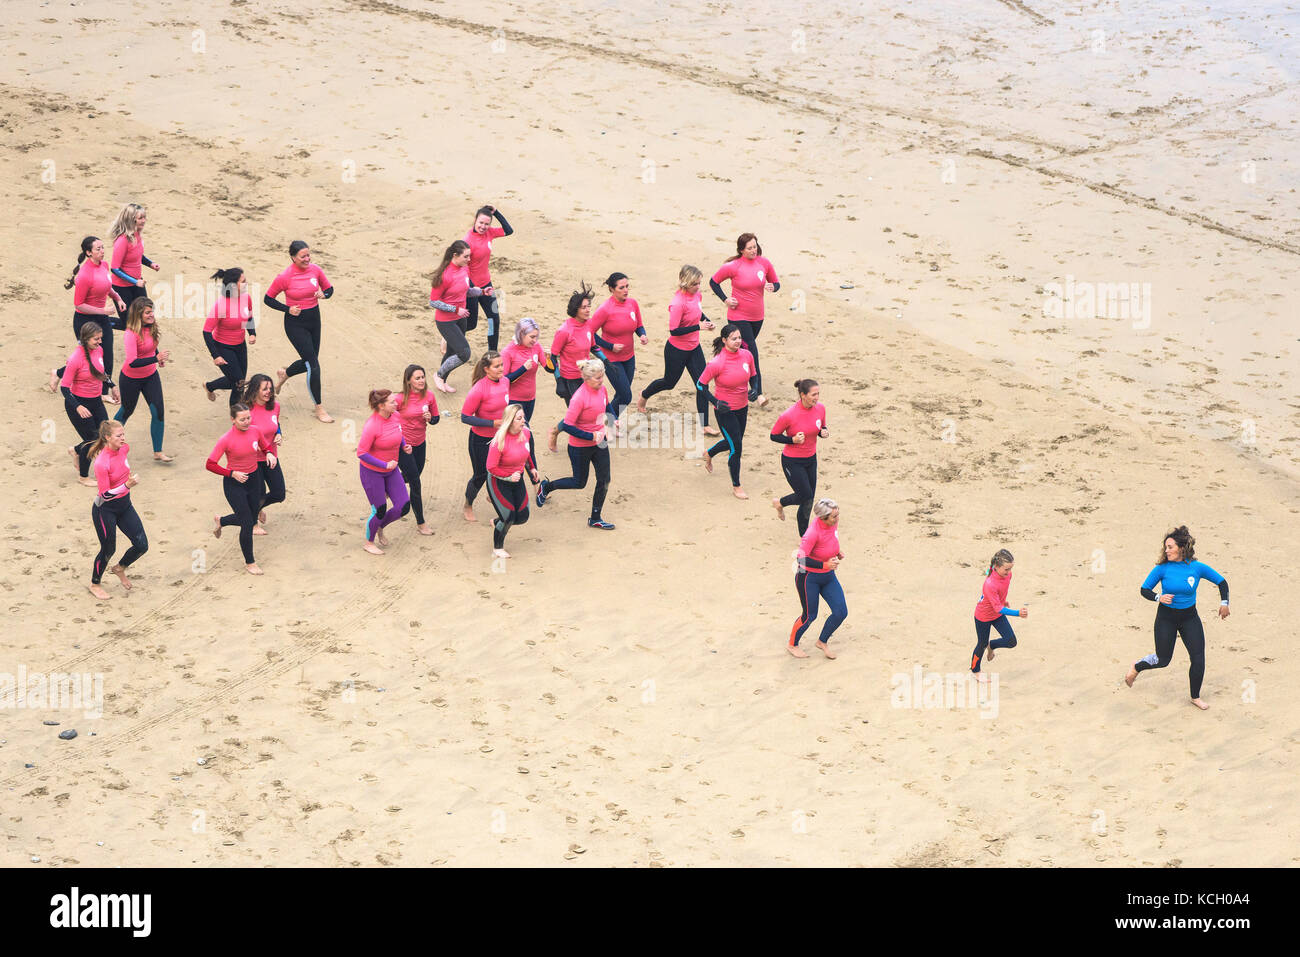 Surf beginners warming up with their instructor. Surf Betty’s Festival - a festival held in Newquay to help empower women through surfing and fitness. Stock Photo